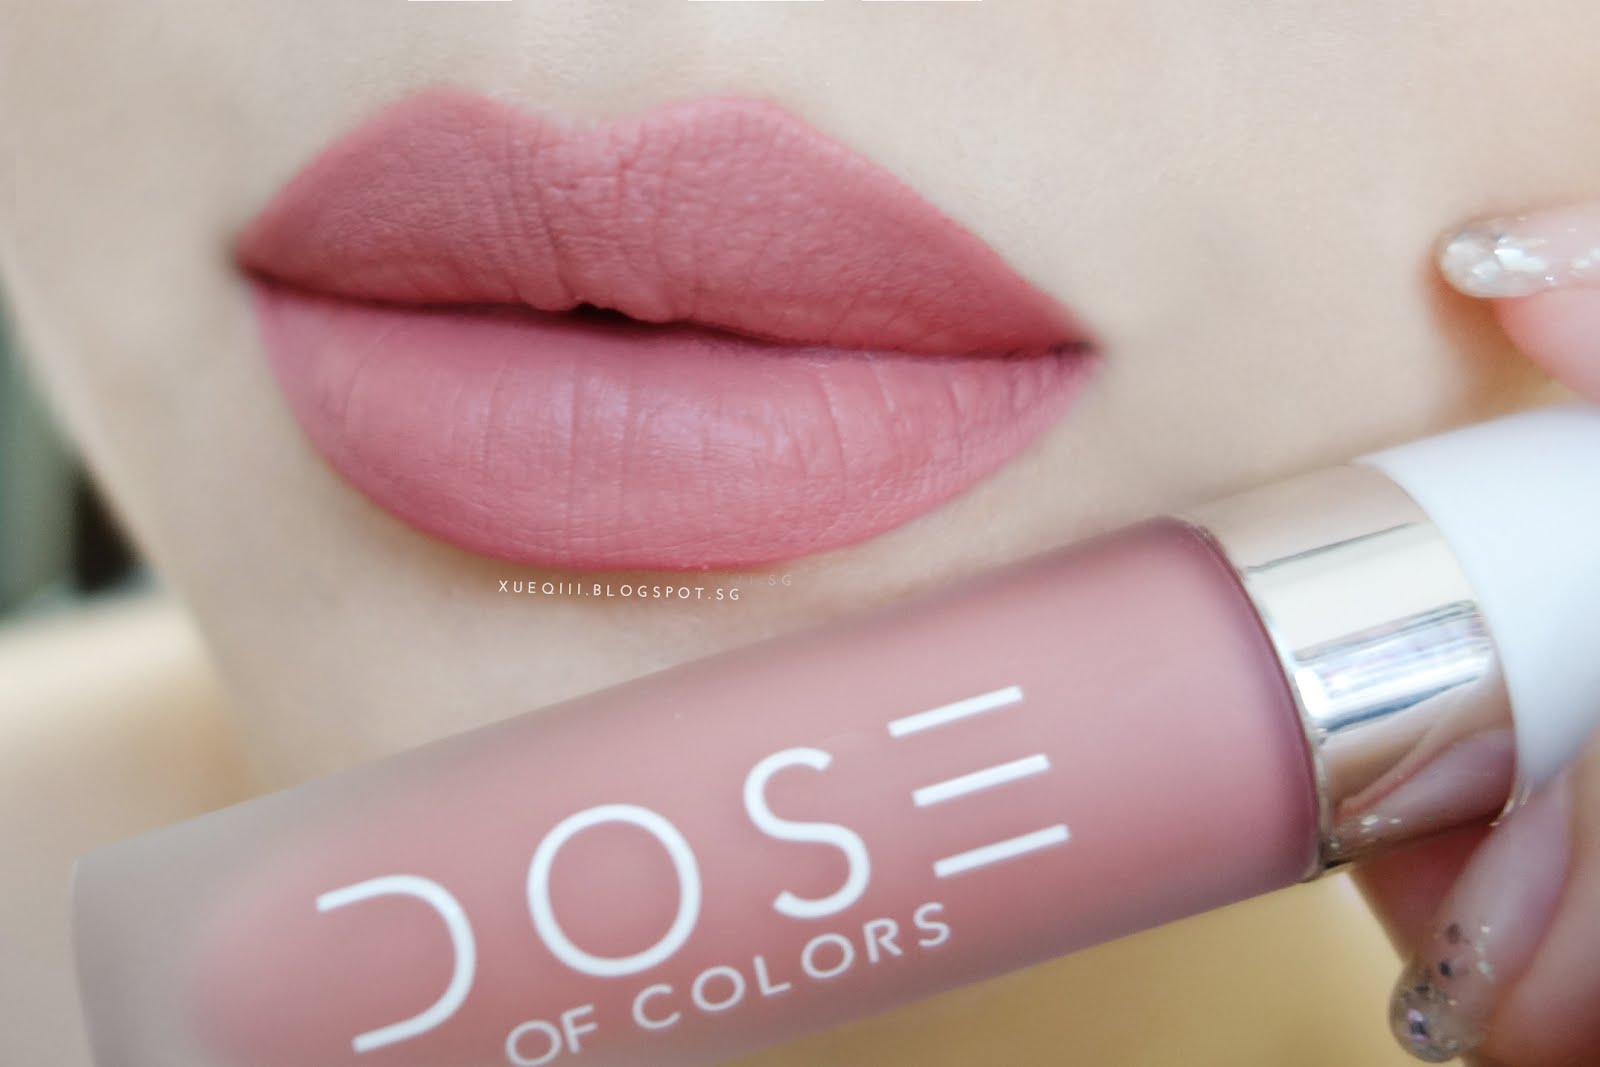 Bare with, Dose of colors and Matte lipsticks on Pinterest